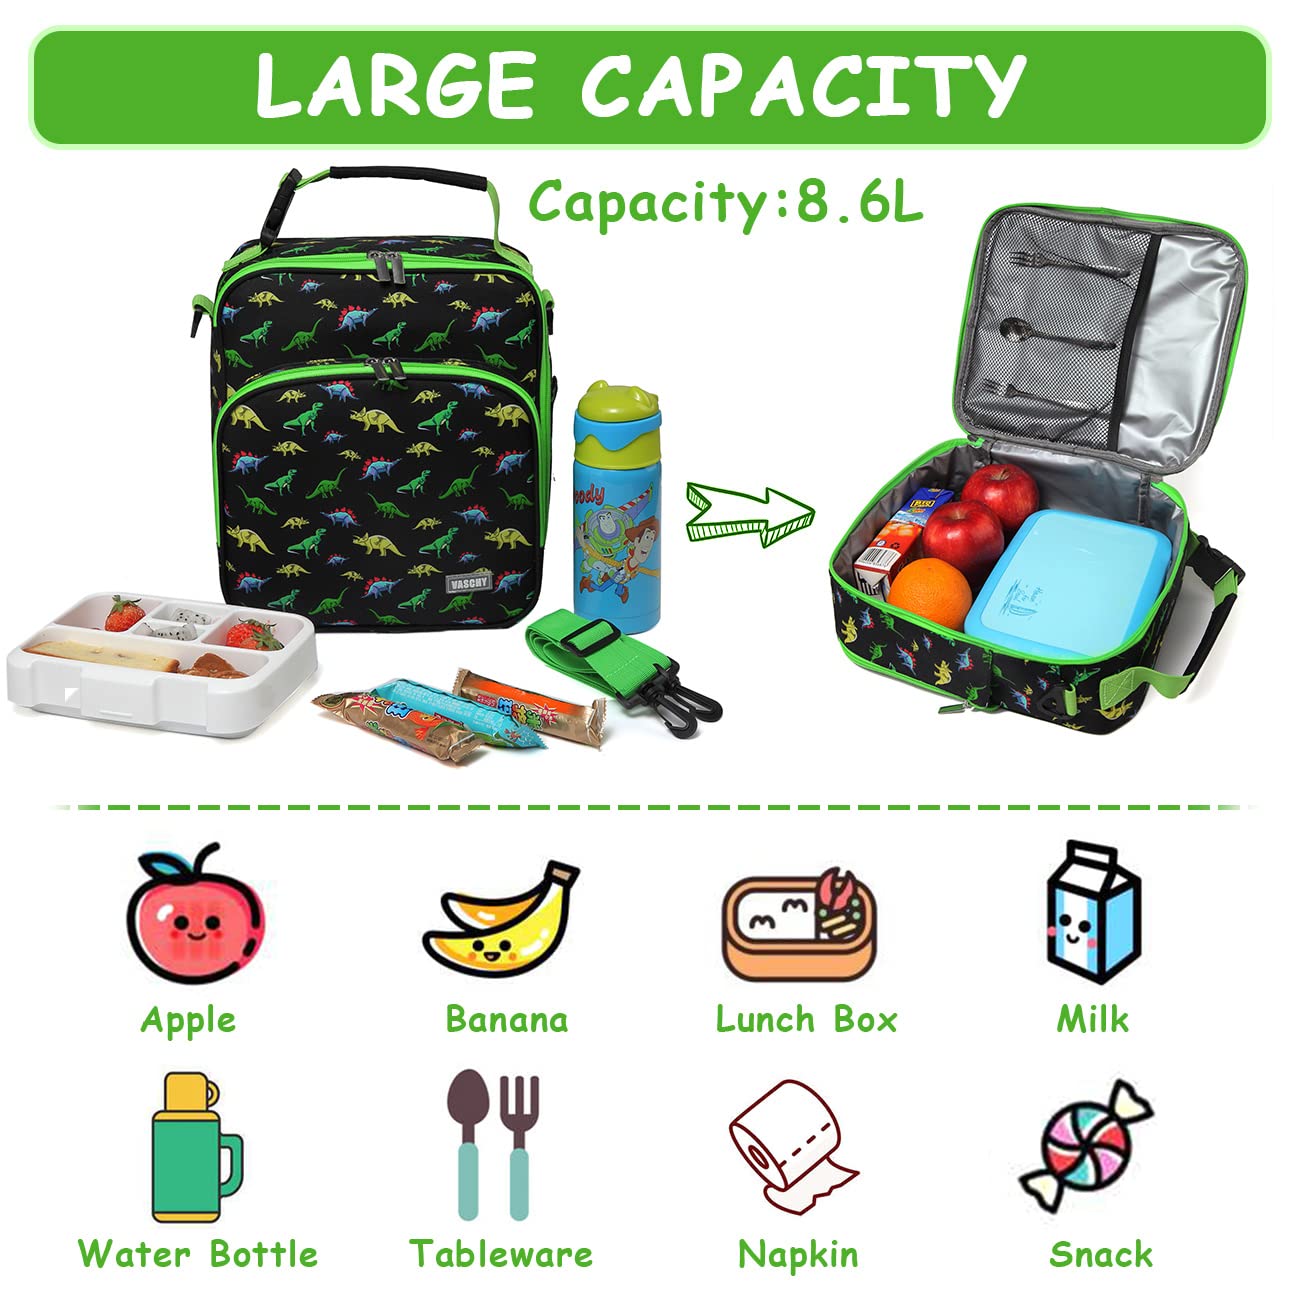 VASCHY Lunch Boxes Bag for Kids, Reusable Lunch Box Containers for Boys and Girls with Detachable Shoulder Strap, Insulated Lunch Coolers for School Cute Dinosaur